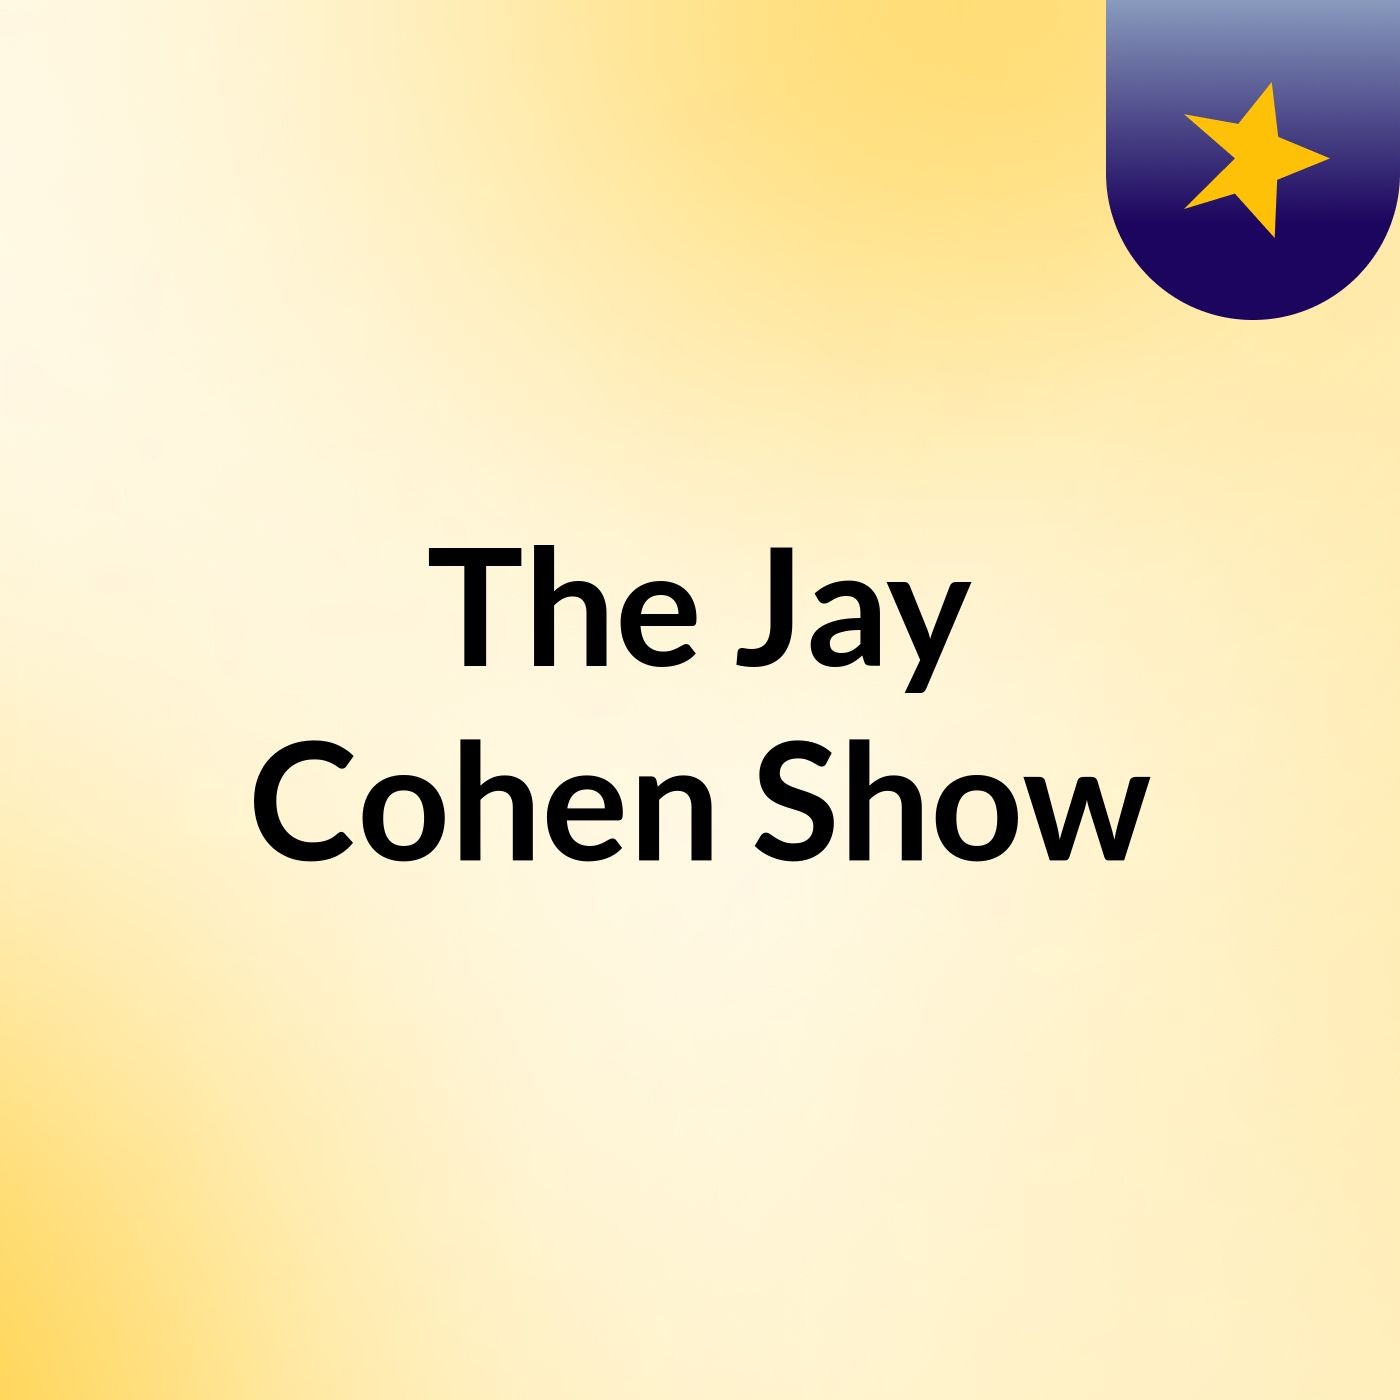 The Jay Cohen Show